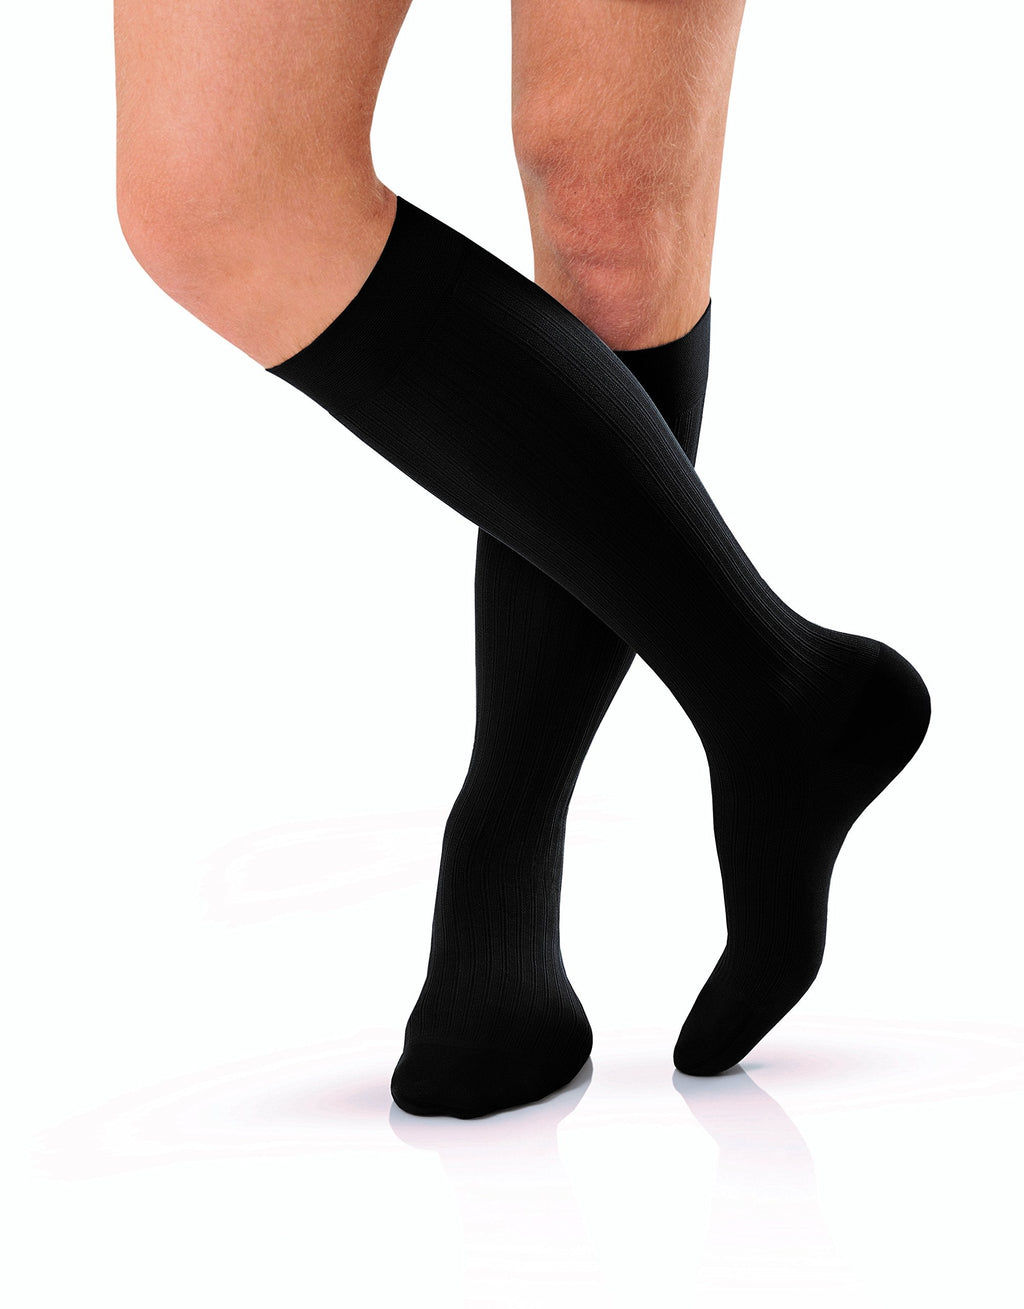 [Australia] - JOBST - 115091 for Men Knee High Closed Toe Compression Stockings, Extra Firm Legware for All Day Comfort for Males, Compression Class- 20-30 "Packaging may vary" Black X-Large (1 Pair) 